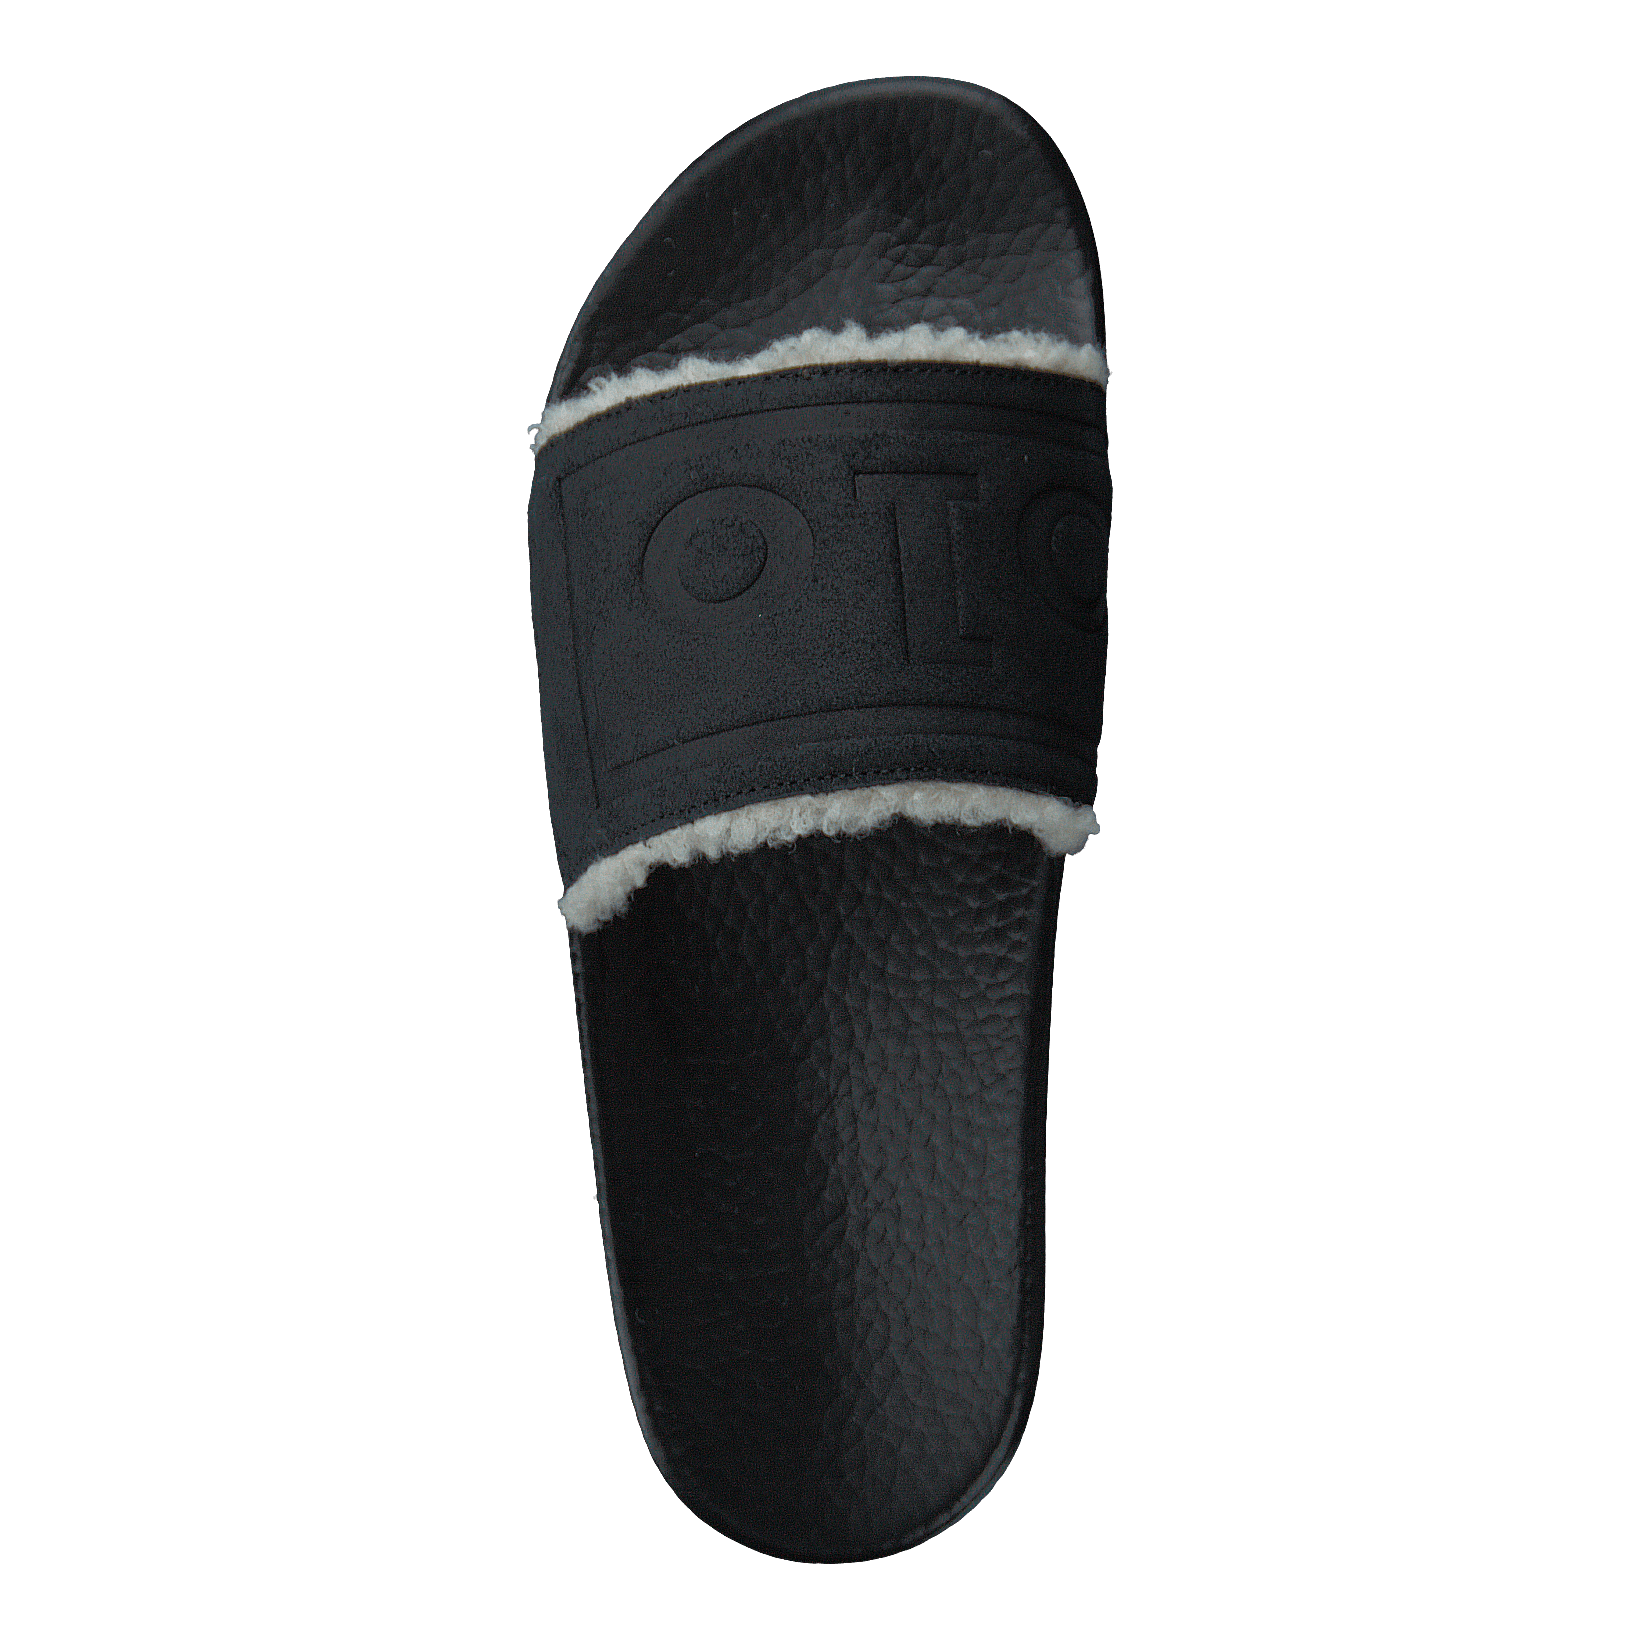 Faux-Shearling–Lined Suede Slide Black